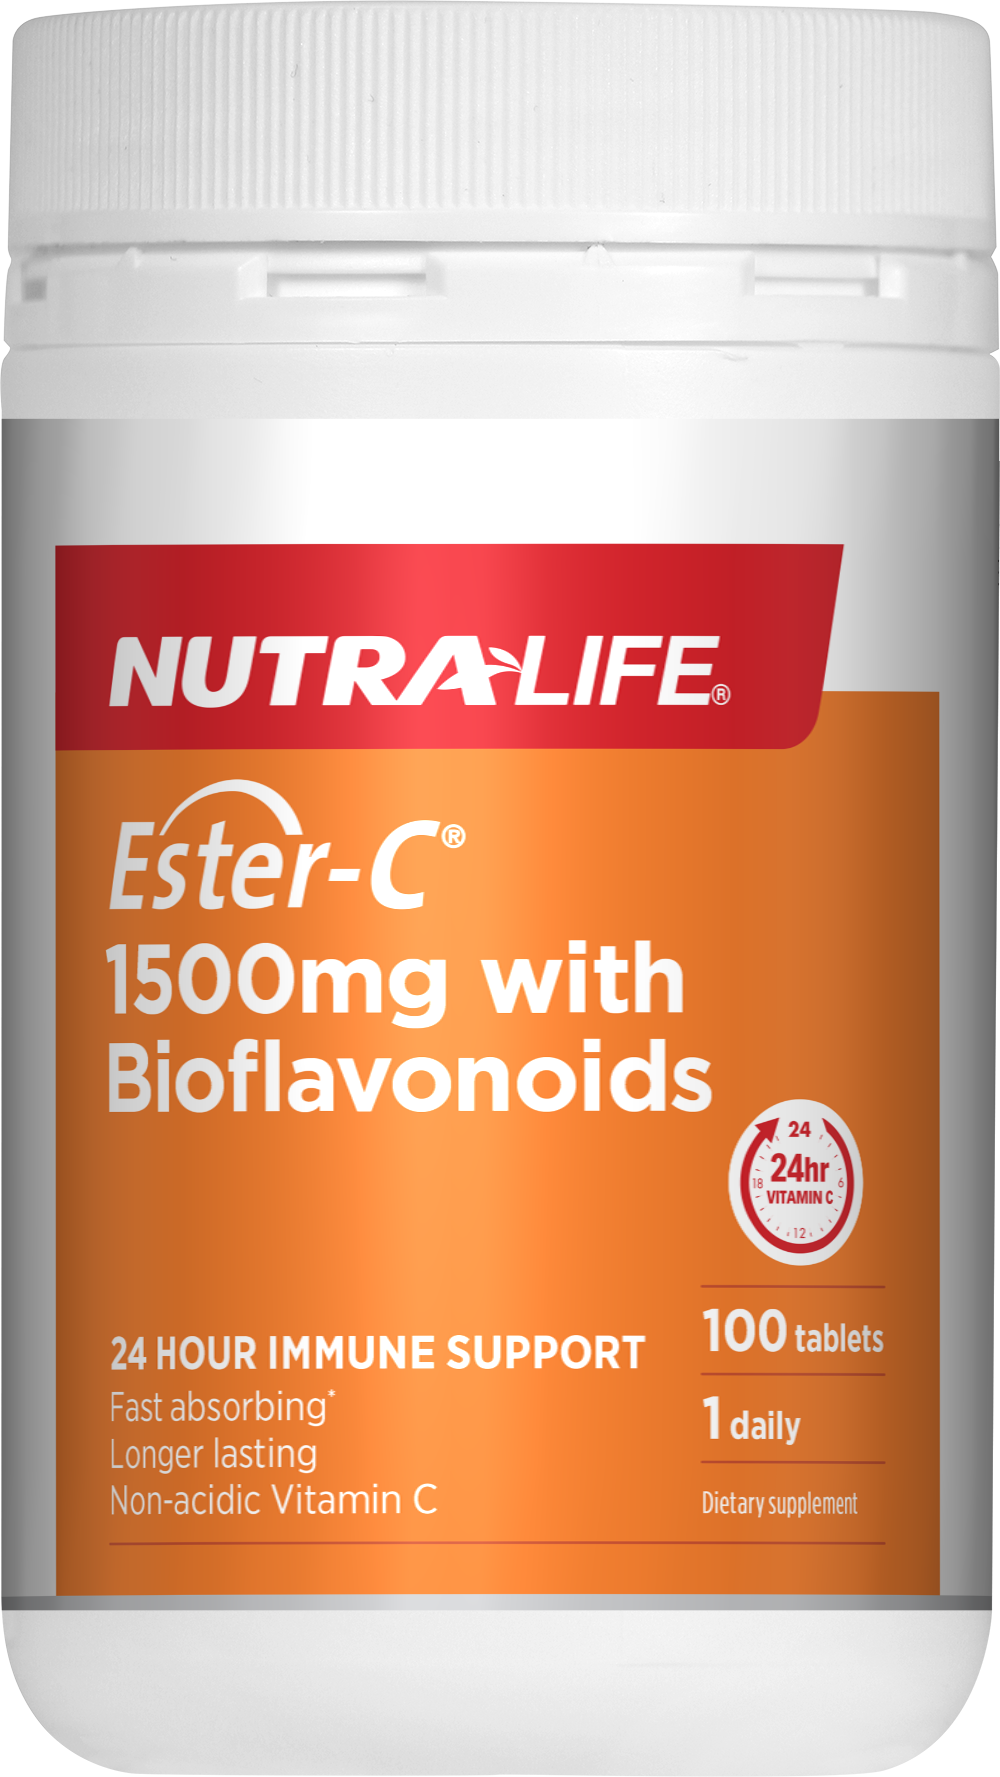 Nutra-Life Ester C 1500mg+Bioflavonoids 1-a-day 100 tabs 